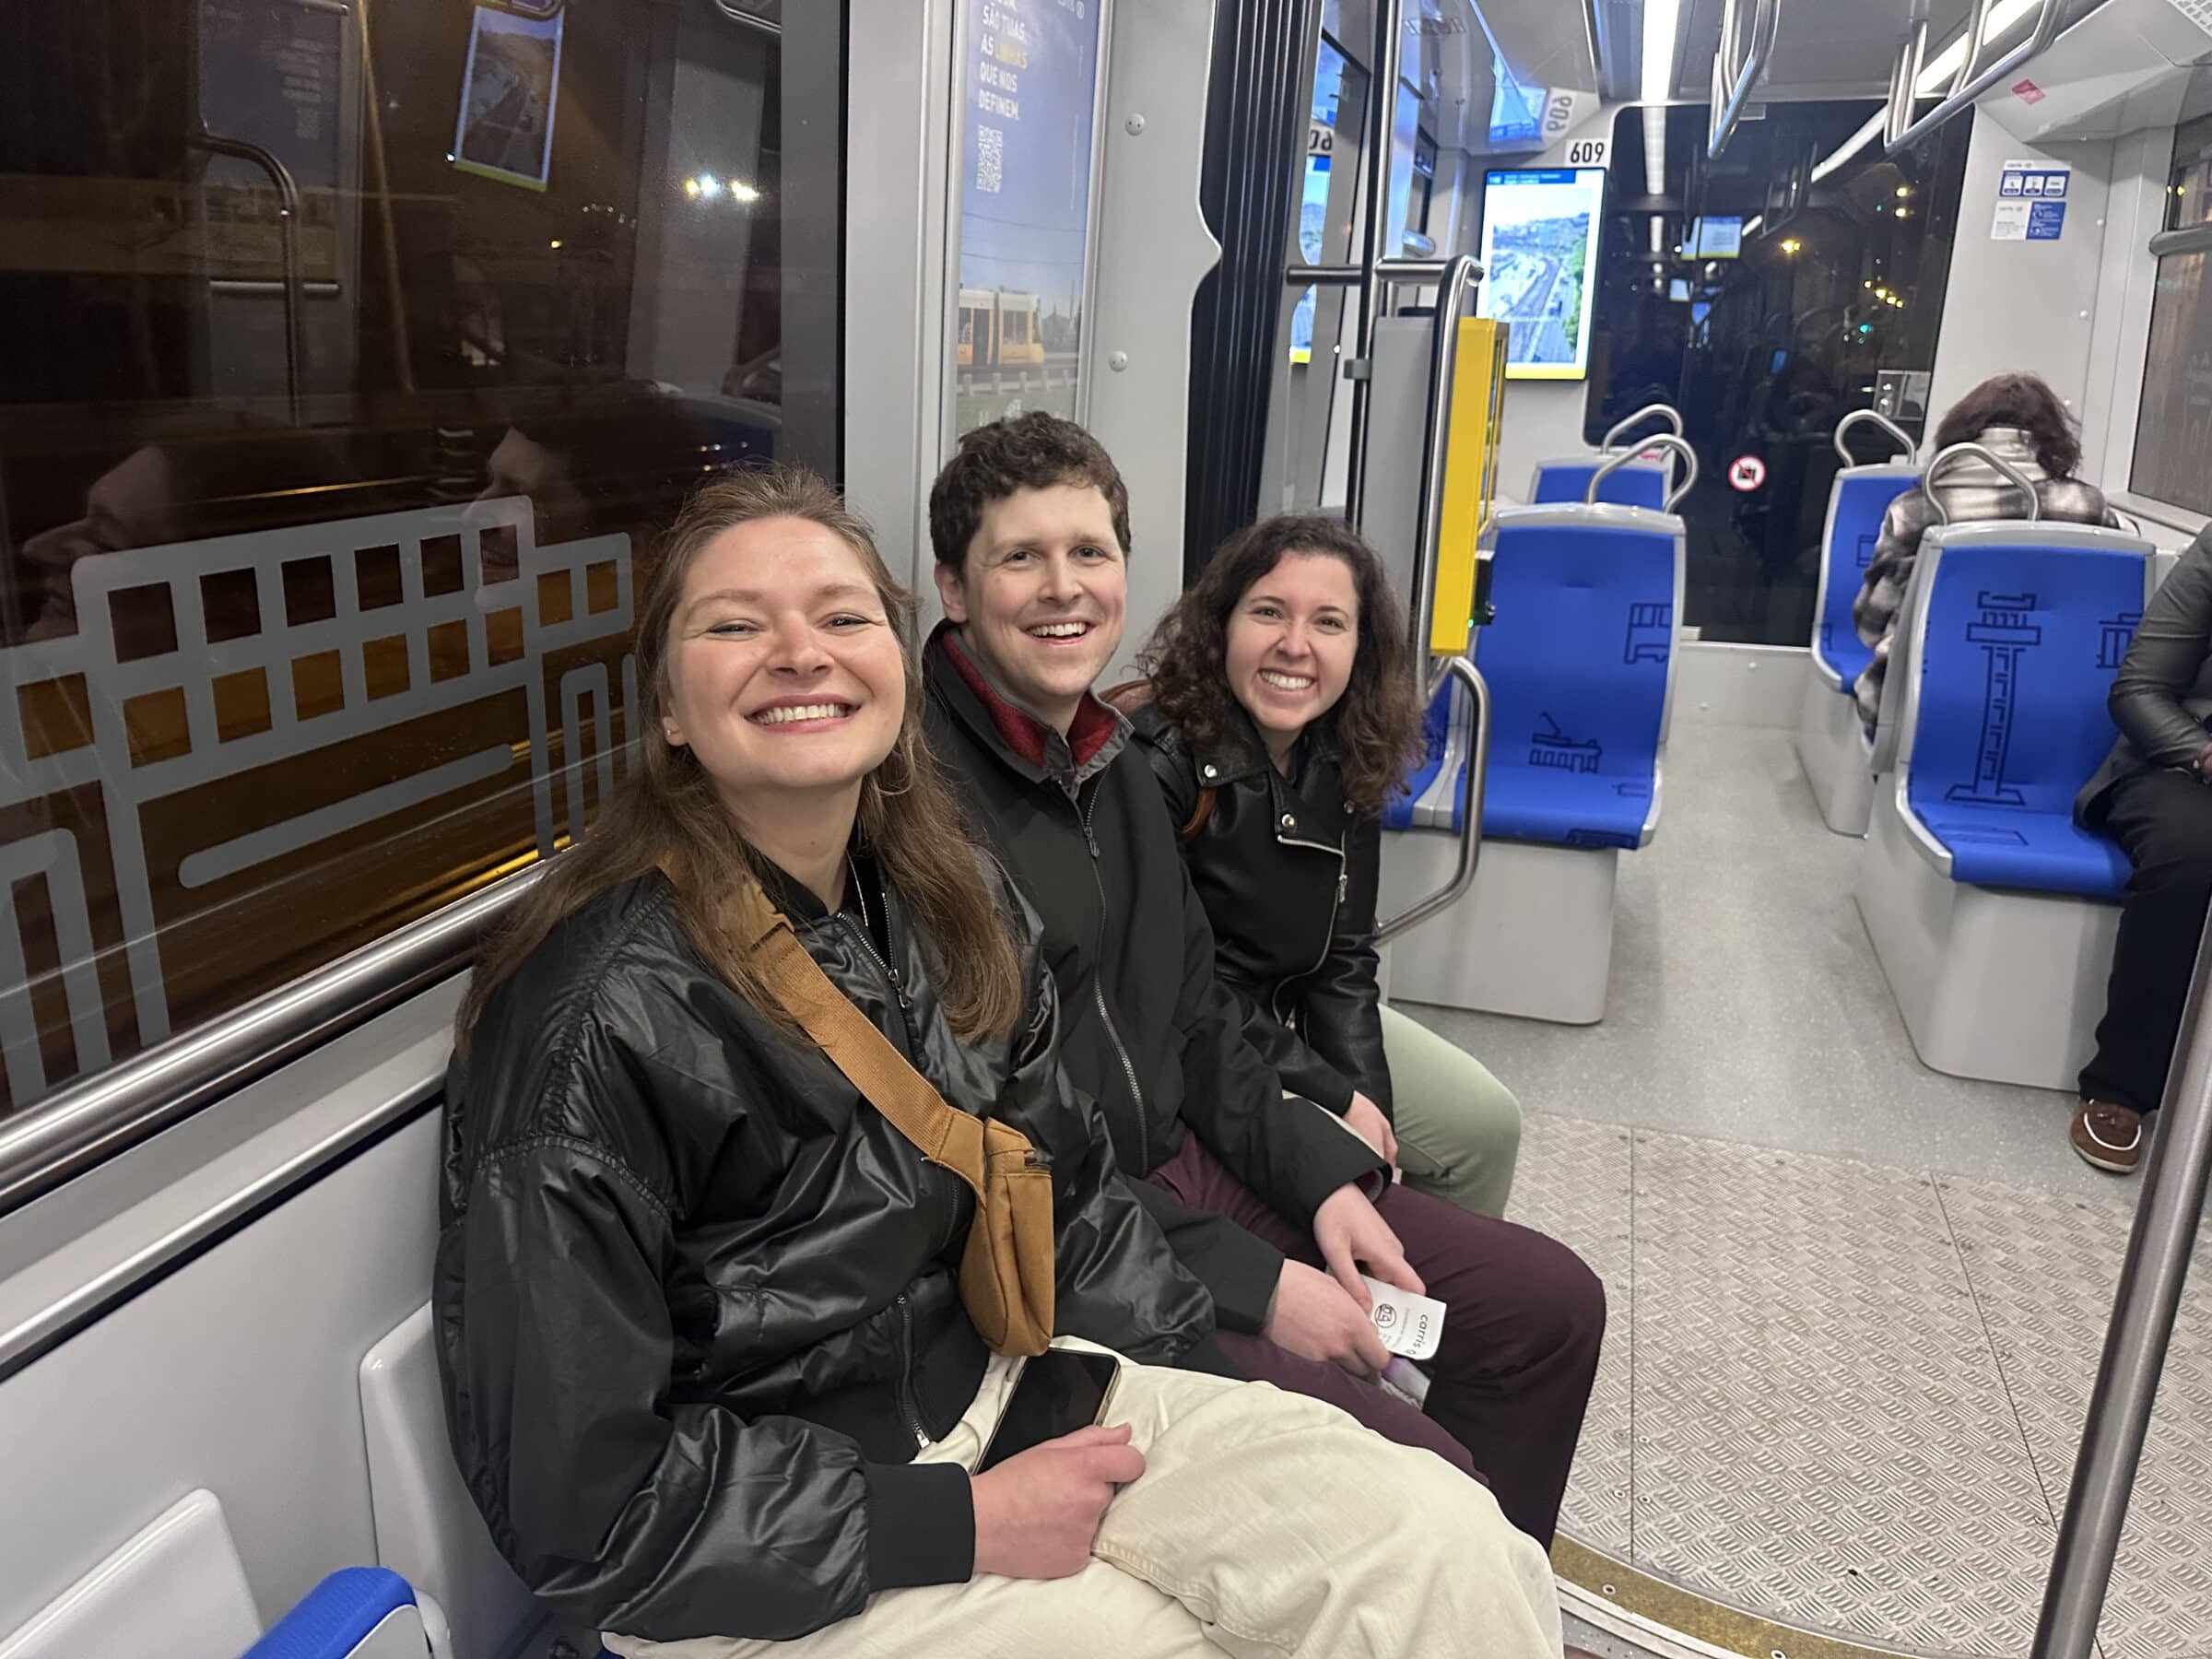 Melissa, Mike and Randi on a less adorable tram on Saturday night